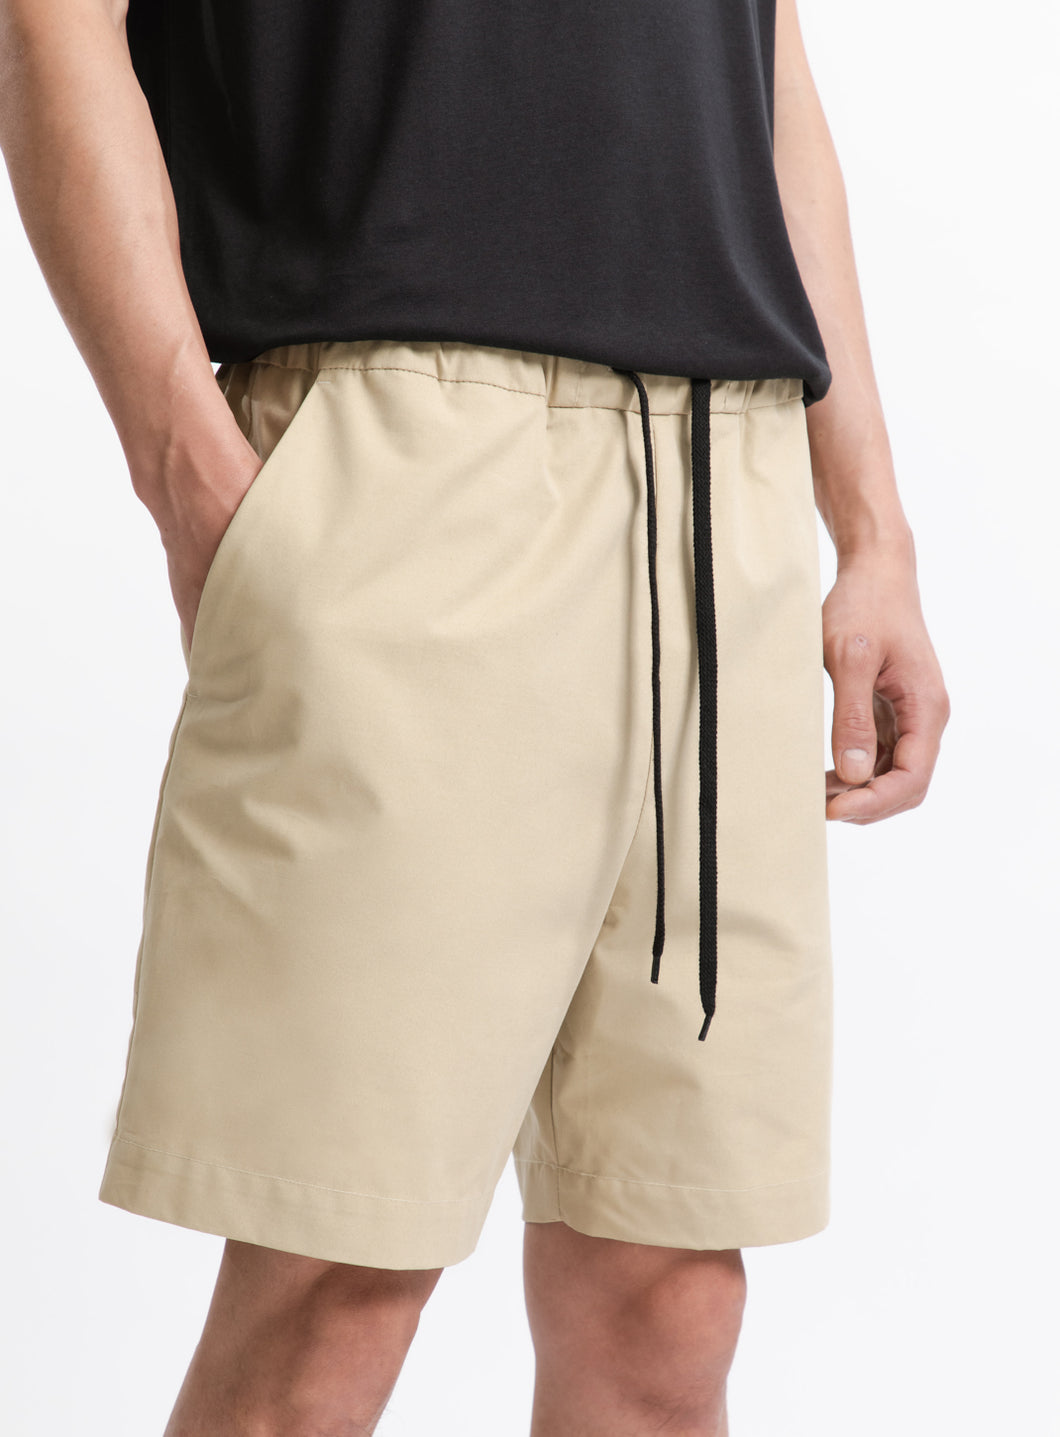 Lace Waist Bermuda Shorts in Ginger Cotton Twill